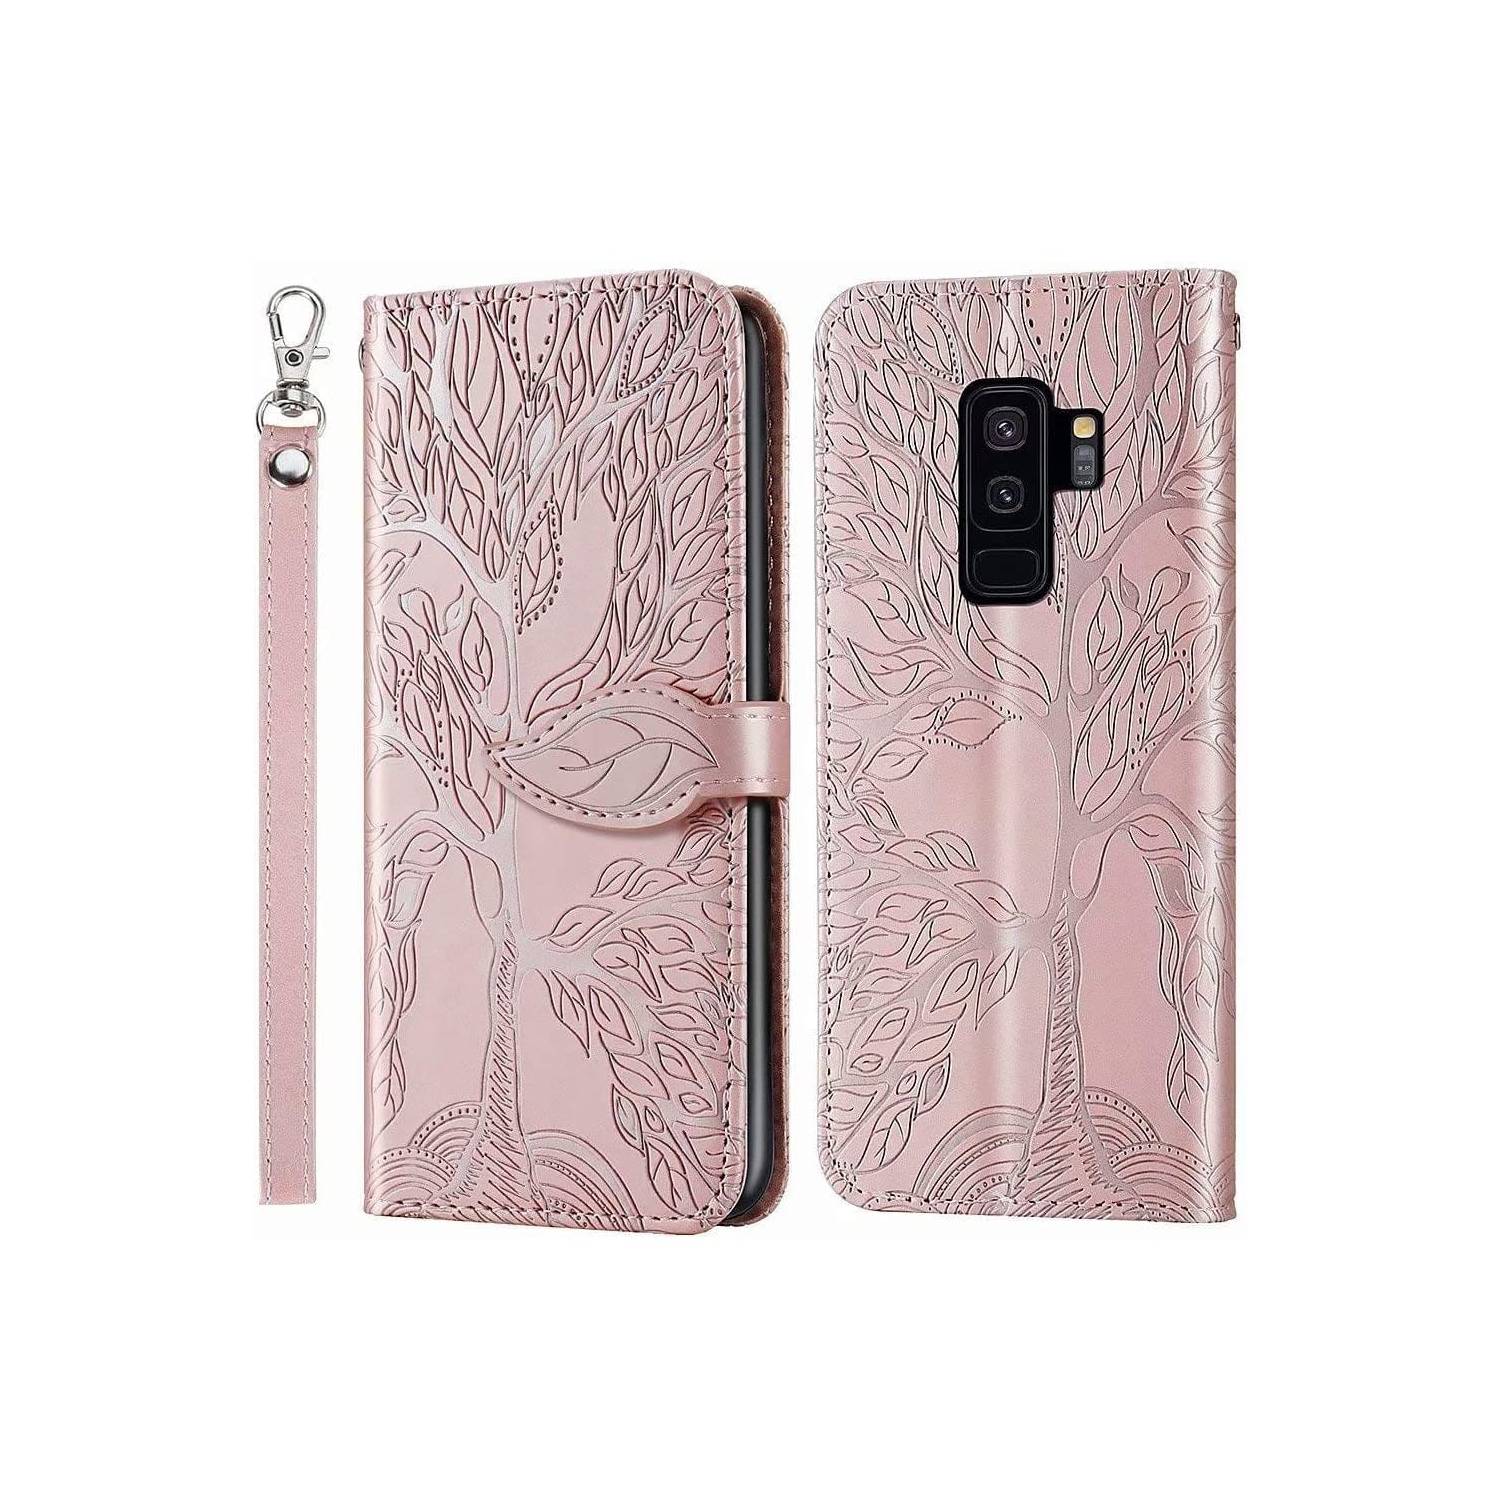 Premium PU Leather Embossed Tree Wallet Phone Case with card slots and wrist strap for Samsung Galaxy S9 Plus SM-G965